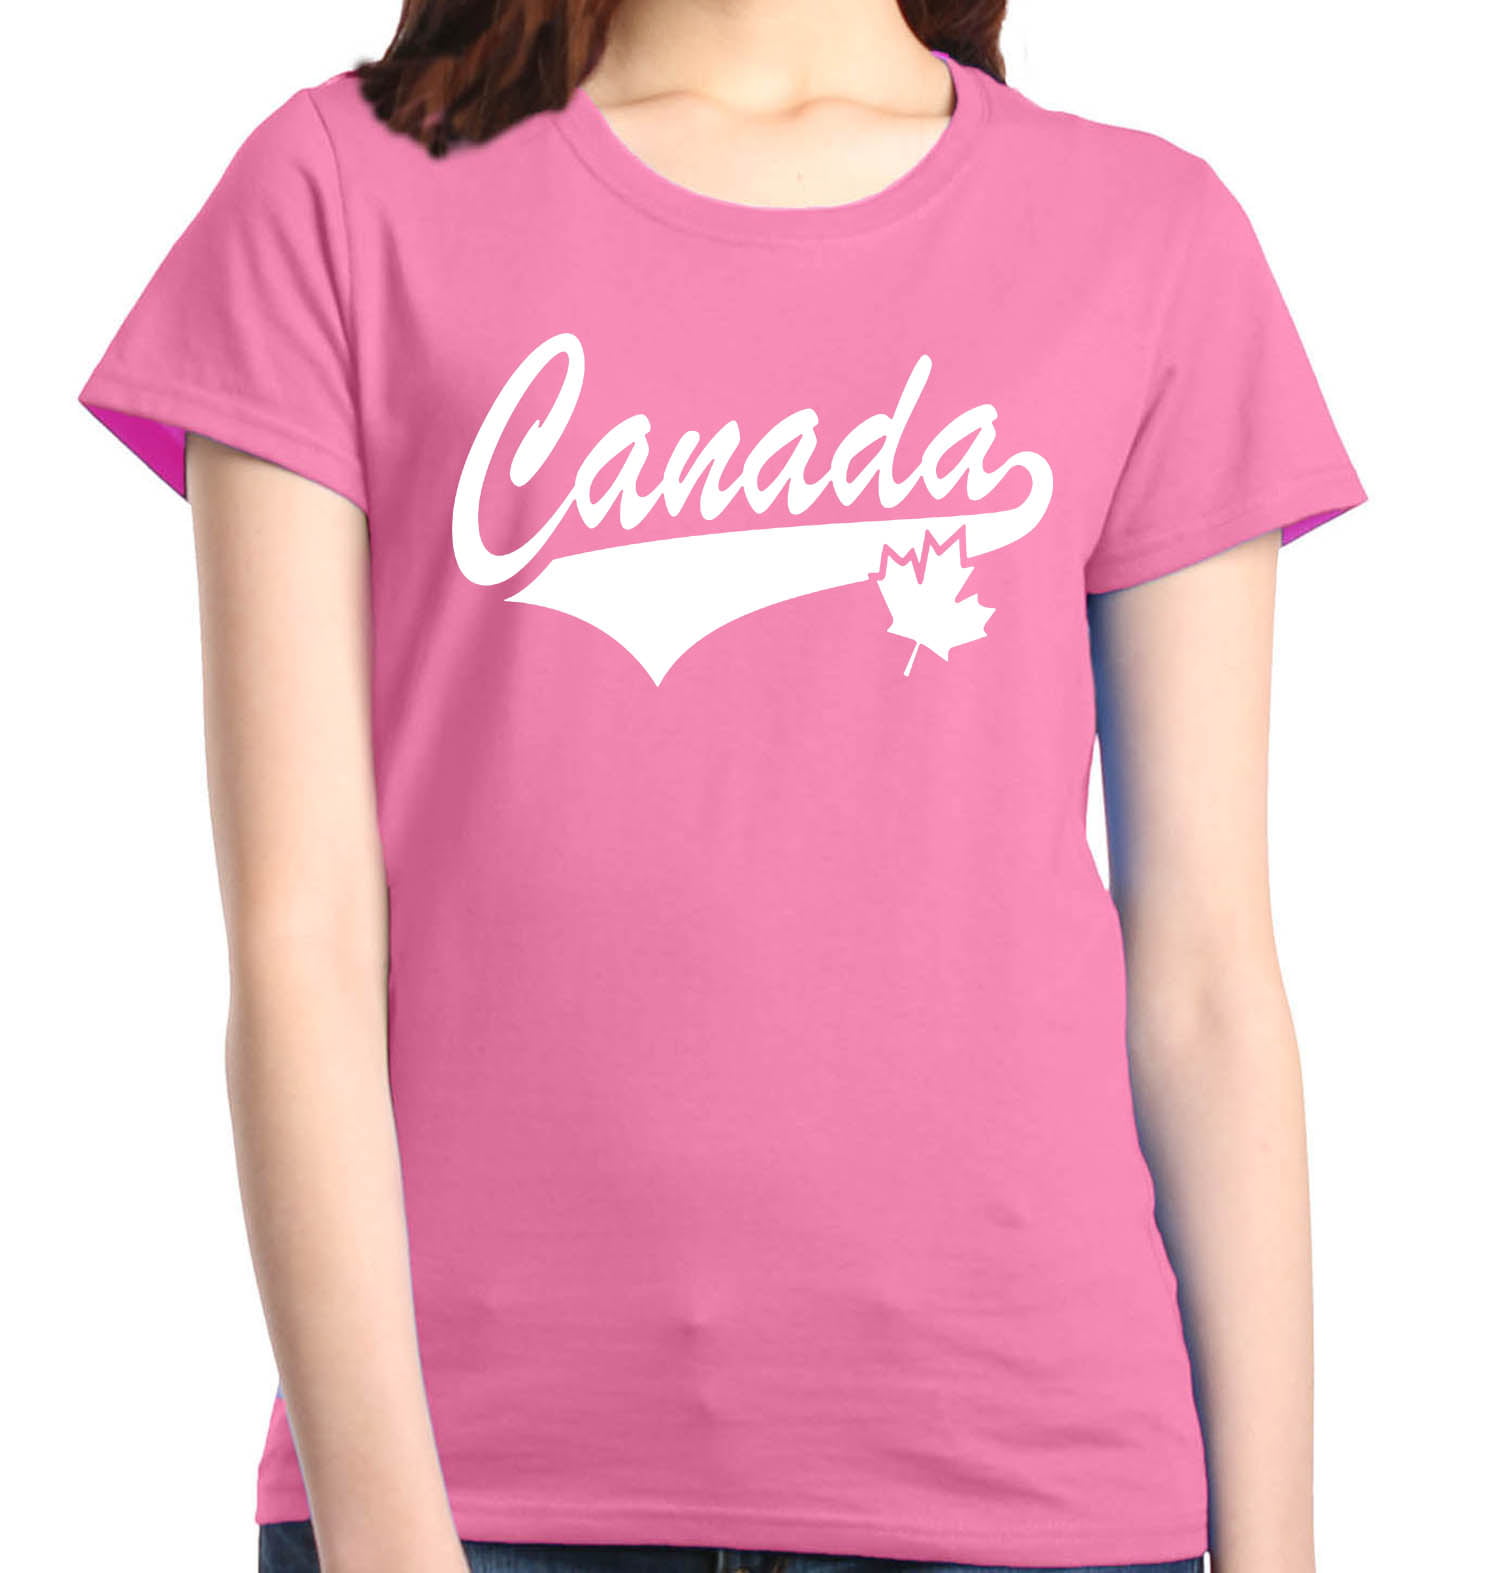 Shop4Ever - Shop4Ever Women's Canada White with Leaf Proud Canadian ...